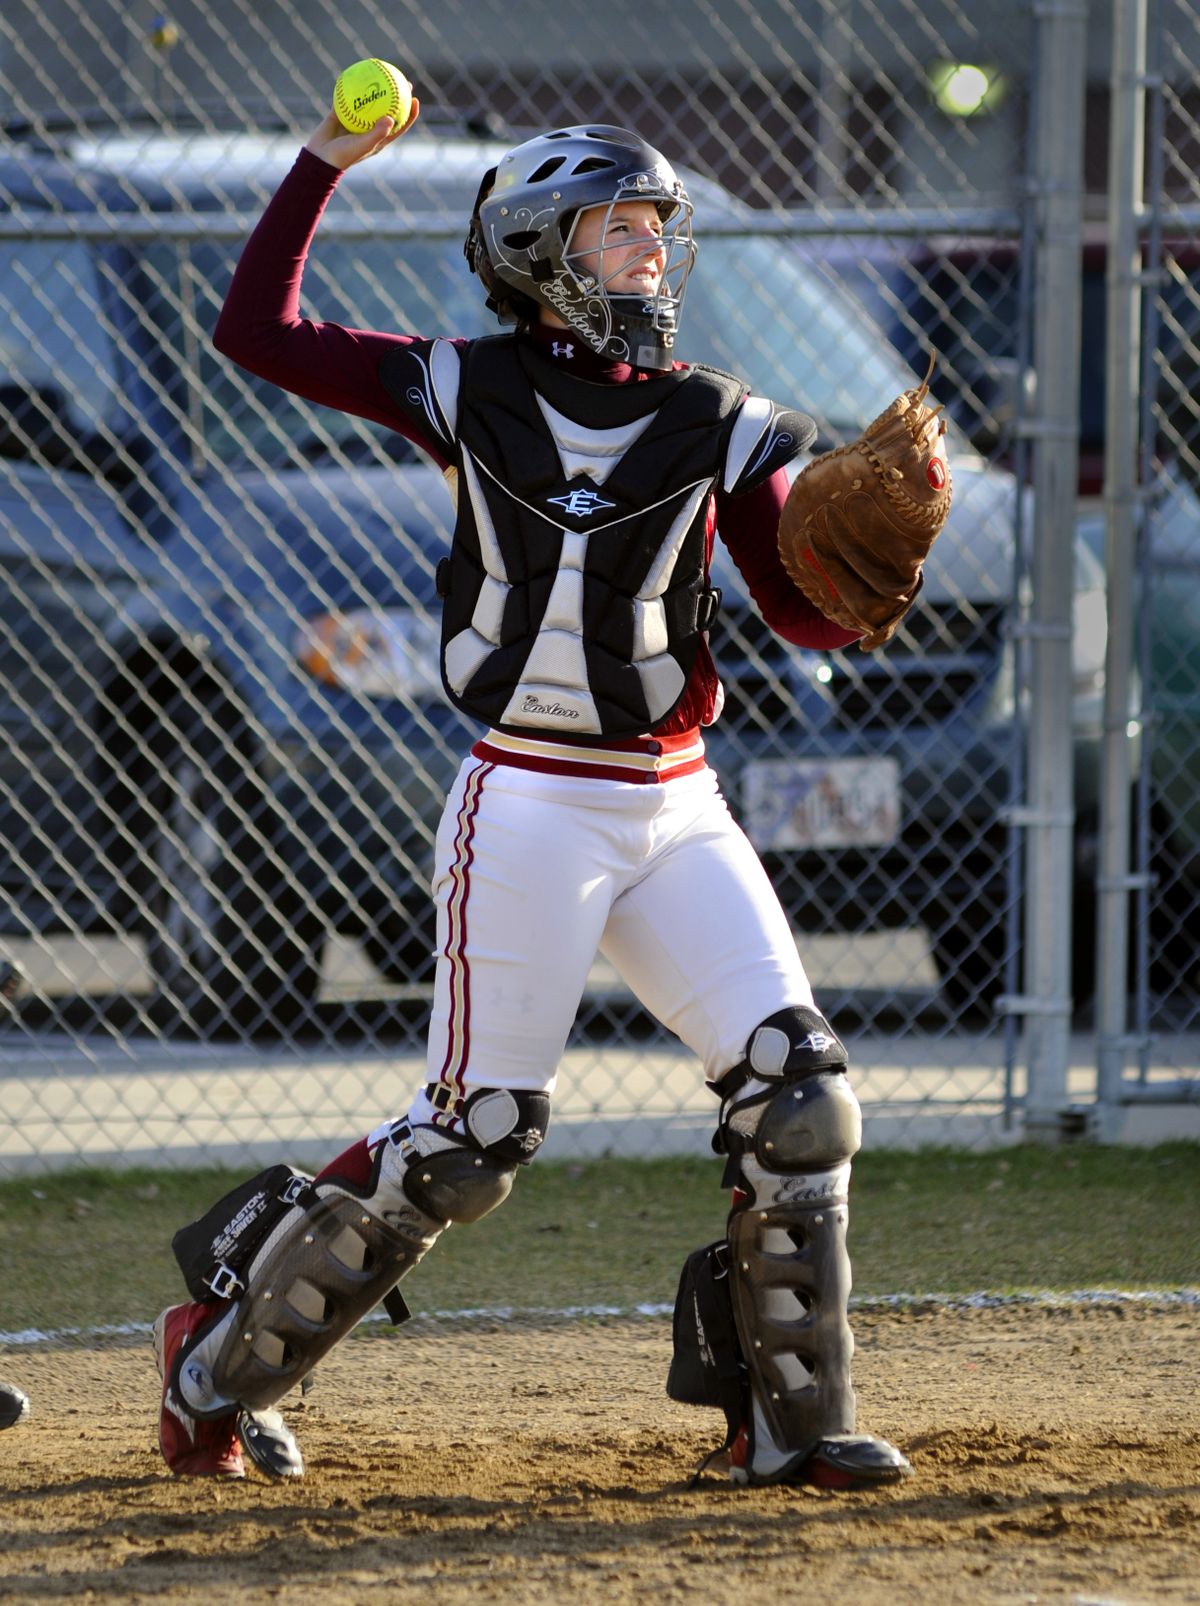 University High School catcher Alene Bethel is a three-year starter for the Titans. (Colin Mulvany)